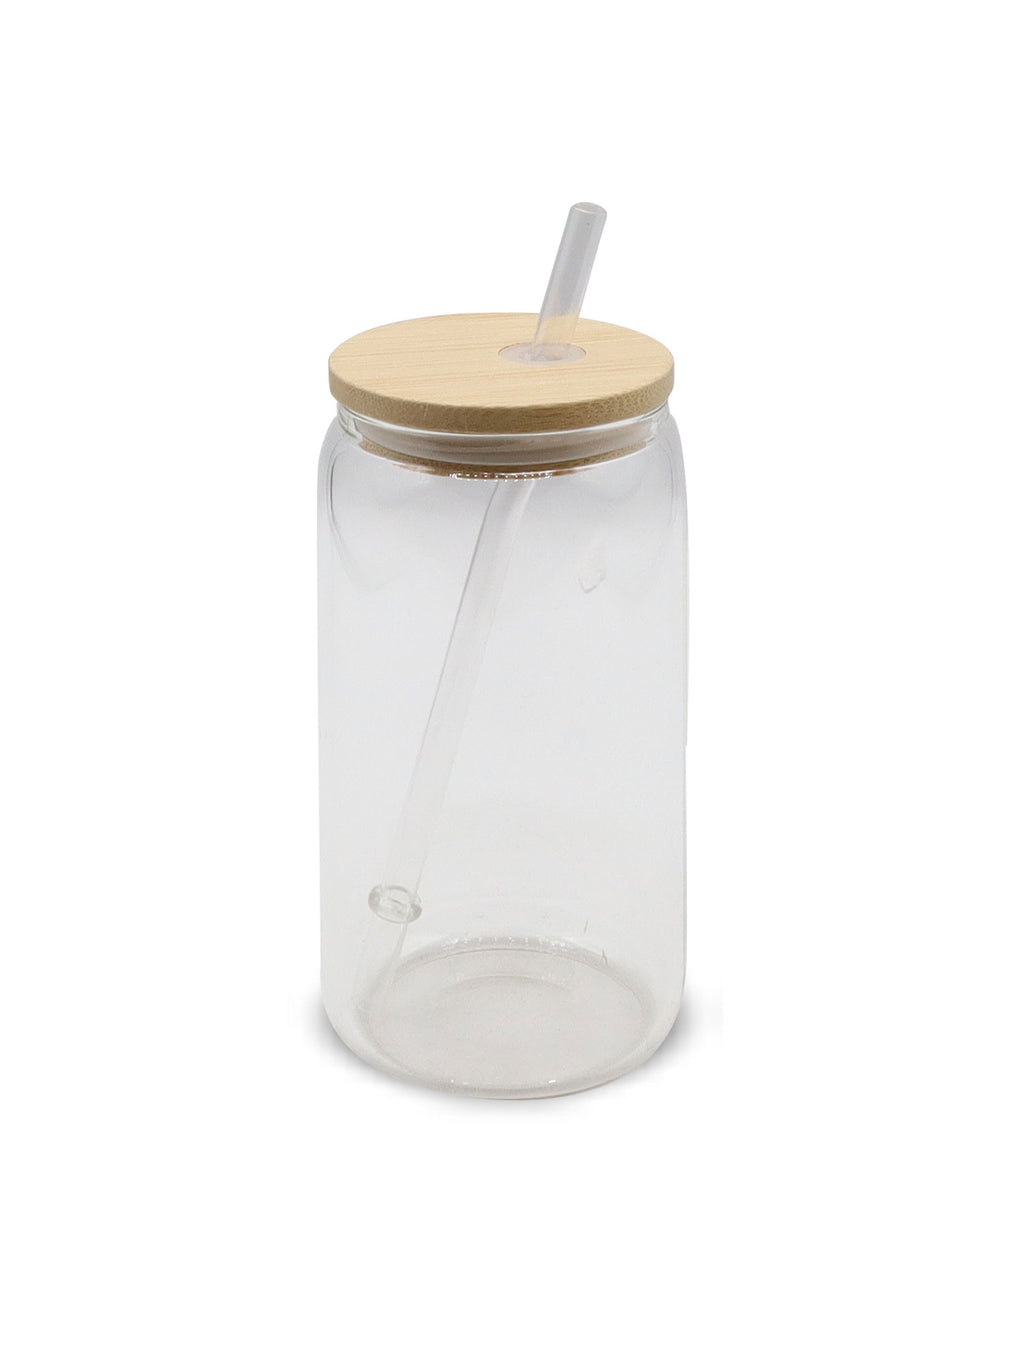 purchase-sublimation-glass-jar-the-tumbler-company